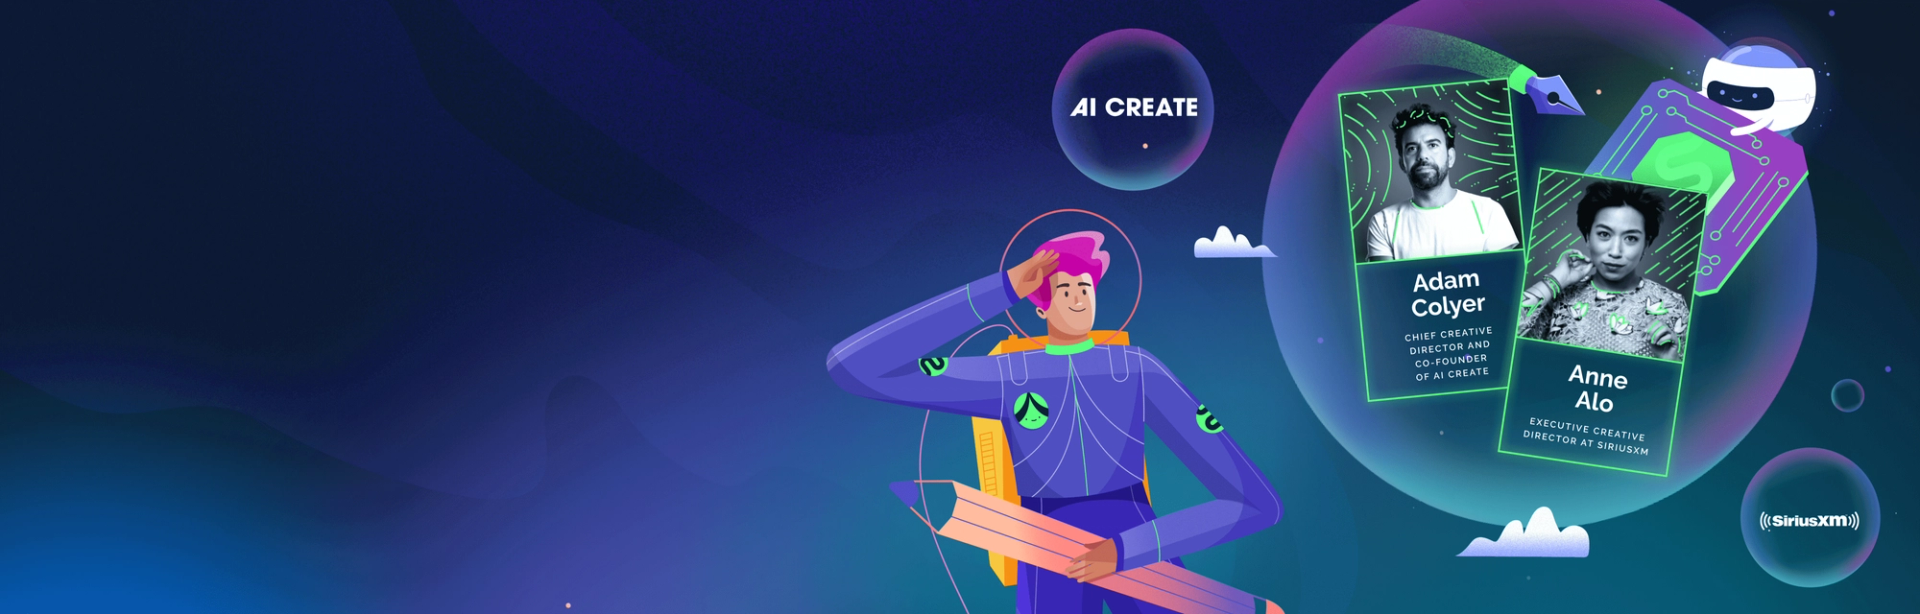 How to Use AI in Creative Workflows (Tips & Examples)